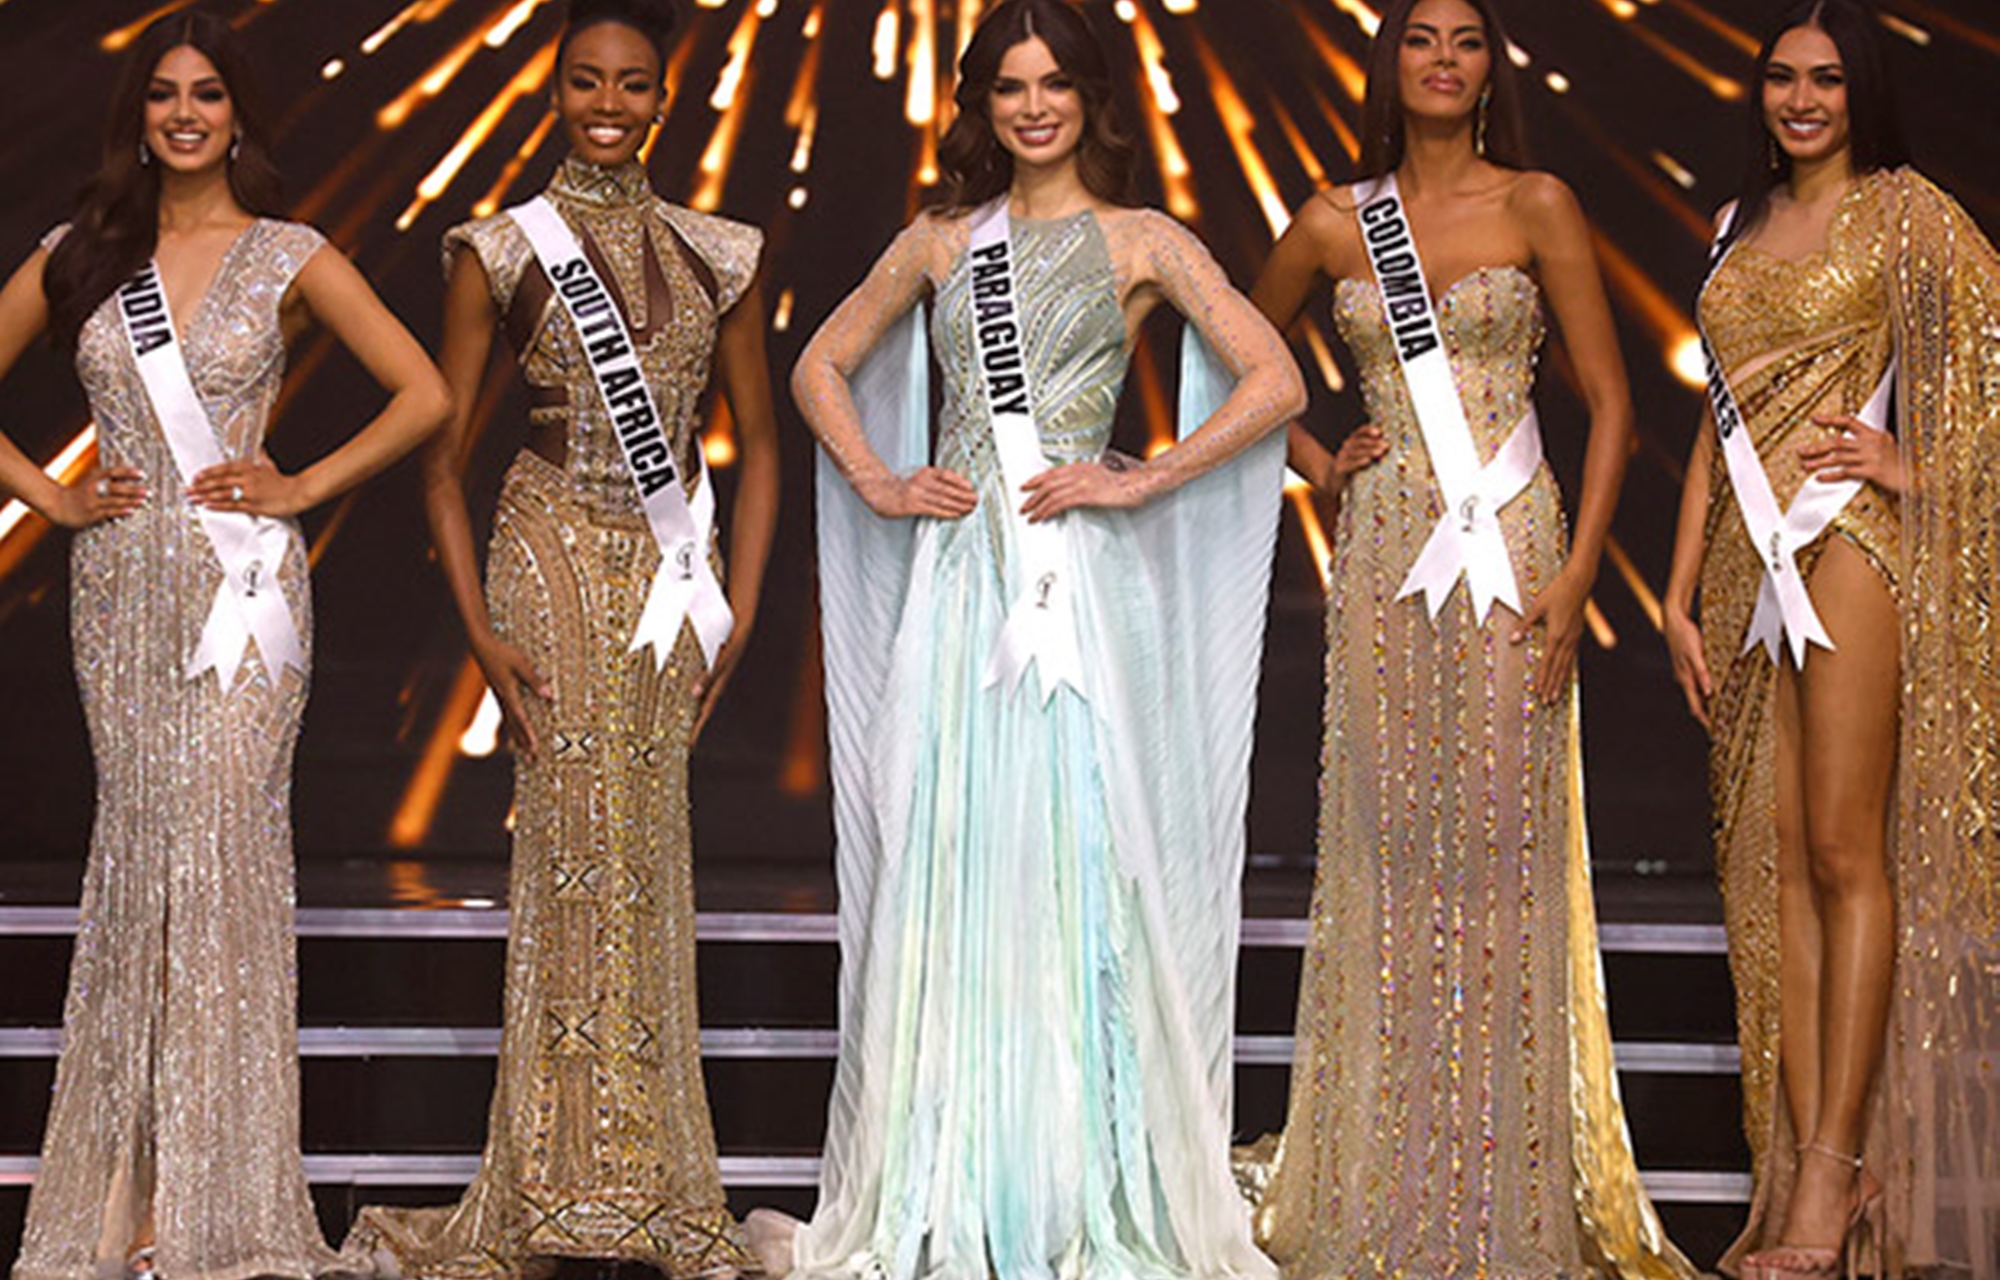 India Crowned Miss Universe 2021 As Miss South Africa Finishes Third